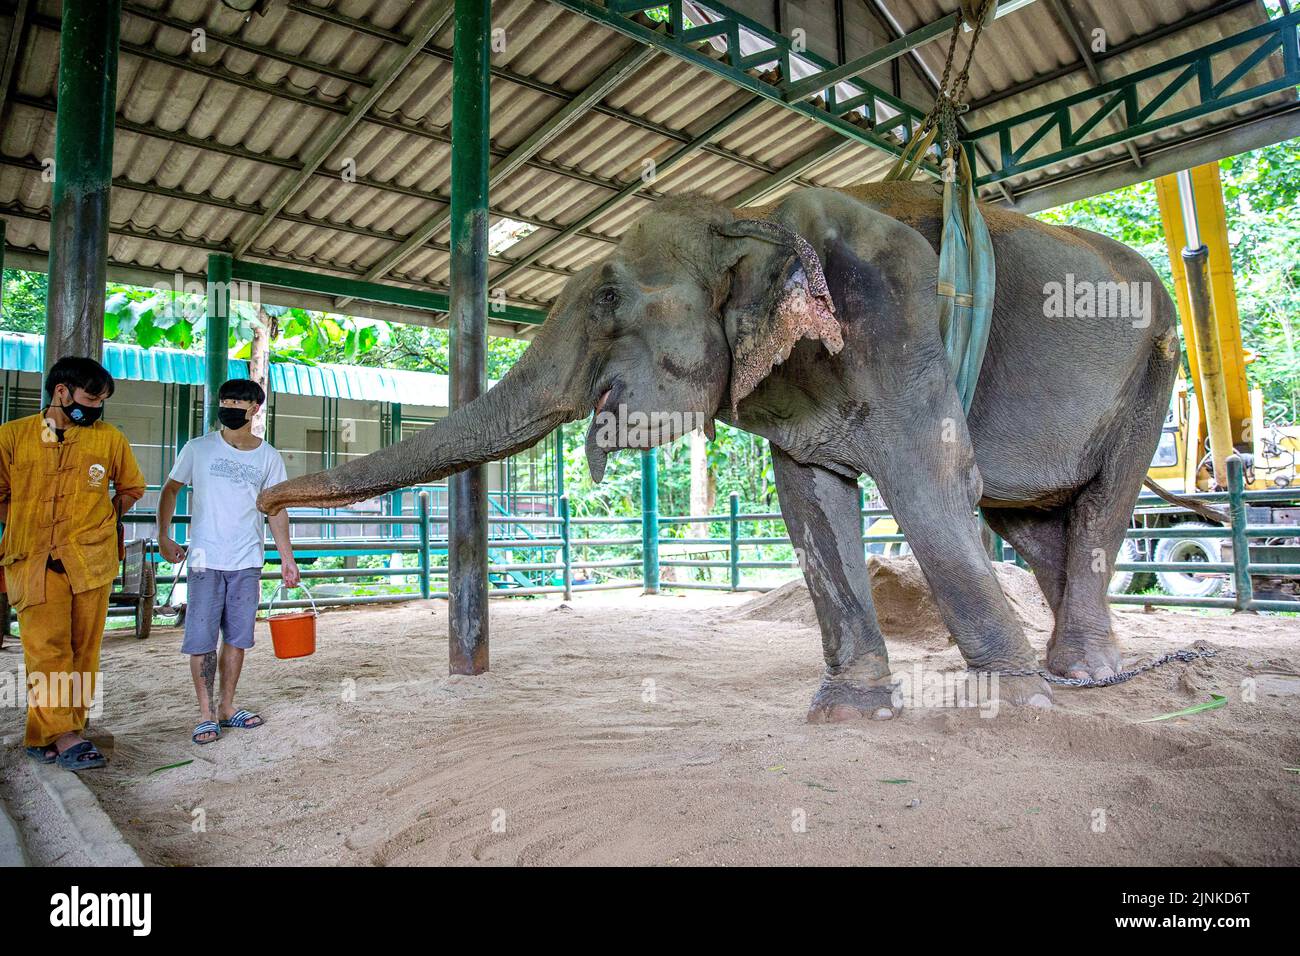 (220812) -- LAMPANG, Aug. 12, 2022 (Xinhua) -- Staff members tend an injured elephant at the 'Friends of the Asian Elephant' elephant hospital in Lampang, Thailand, on Aug. 6, 2022.  Deep in the forest of Lampang province in northern Thailand, the hospital, named Friends of the Asian Elephant (FAE), is the first hospital in the world dedicated to treating injured elephants.   Since its establishment in 1993, the hospital has saved more than 5,000 elephants with illnesses varying from diarrhoea to eye diseases and injuries through car accidents or mine explosions.   TO GO WITH 'Feature: Lifelon Stock Photo